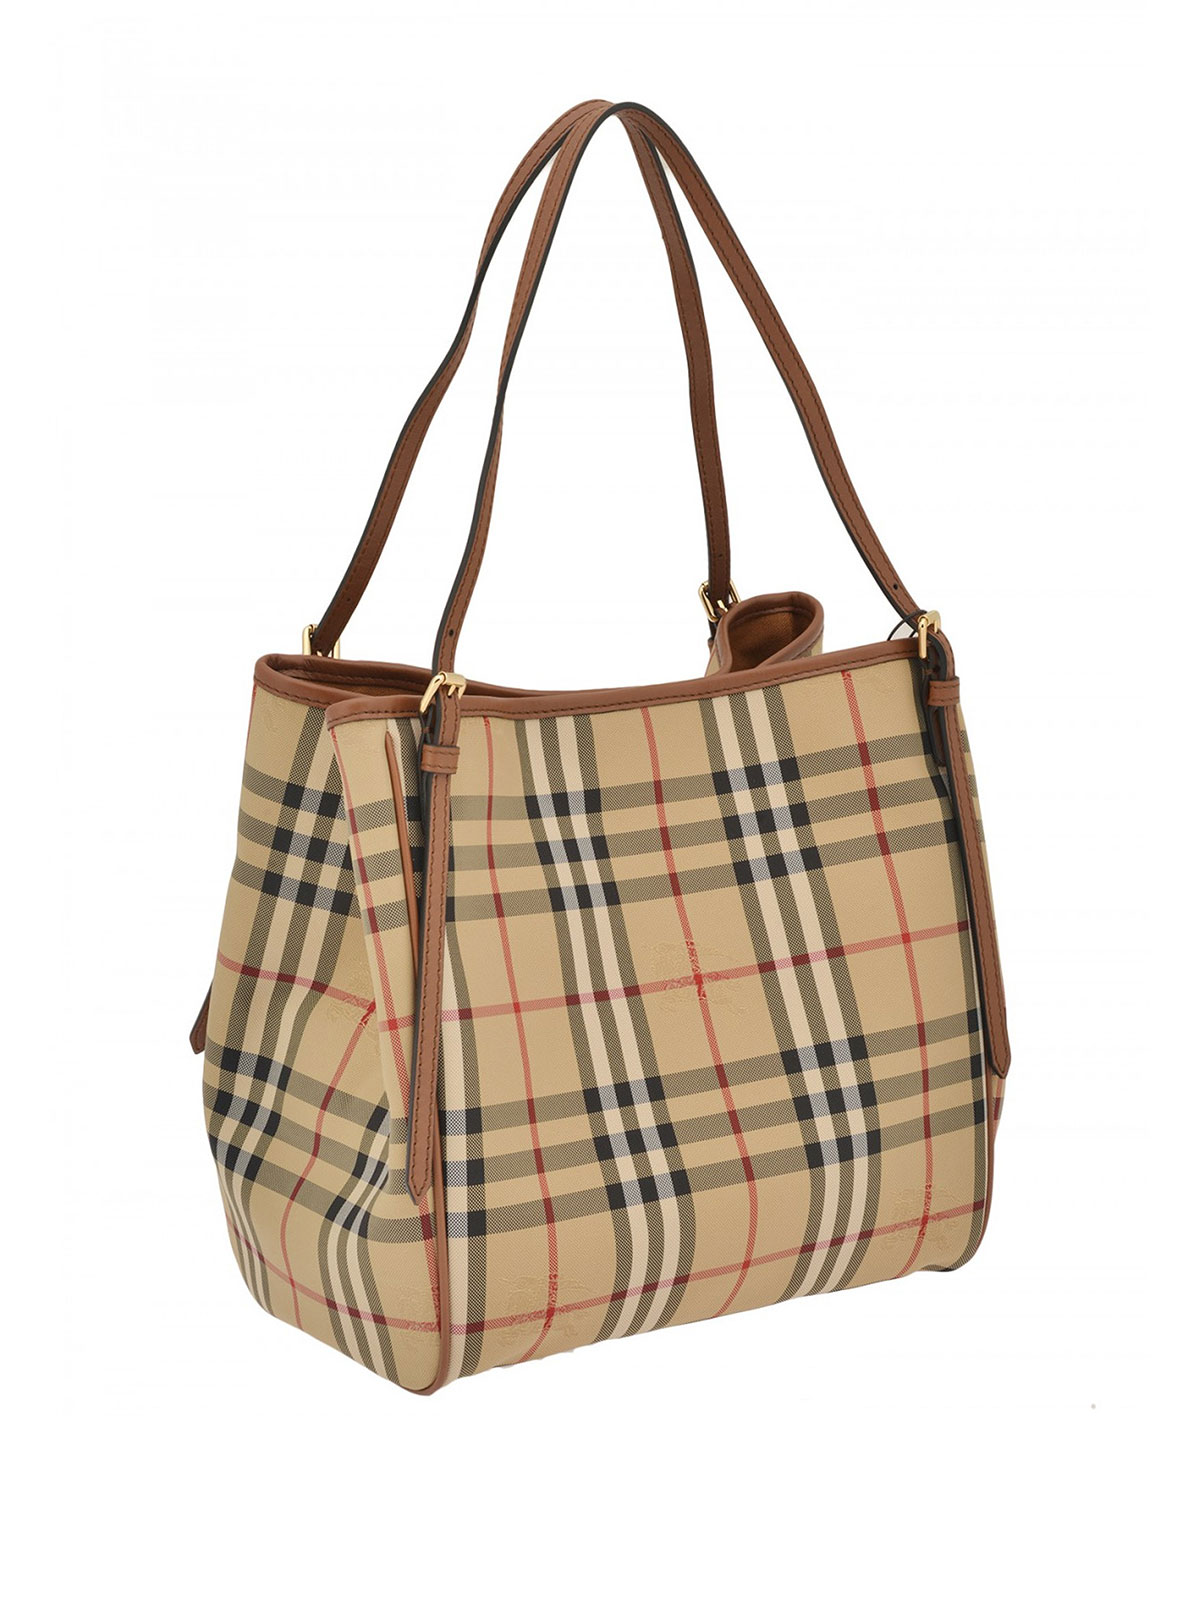 Totes bags Burberry - The Canter small tote - 4028897 